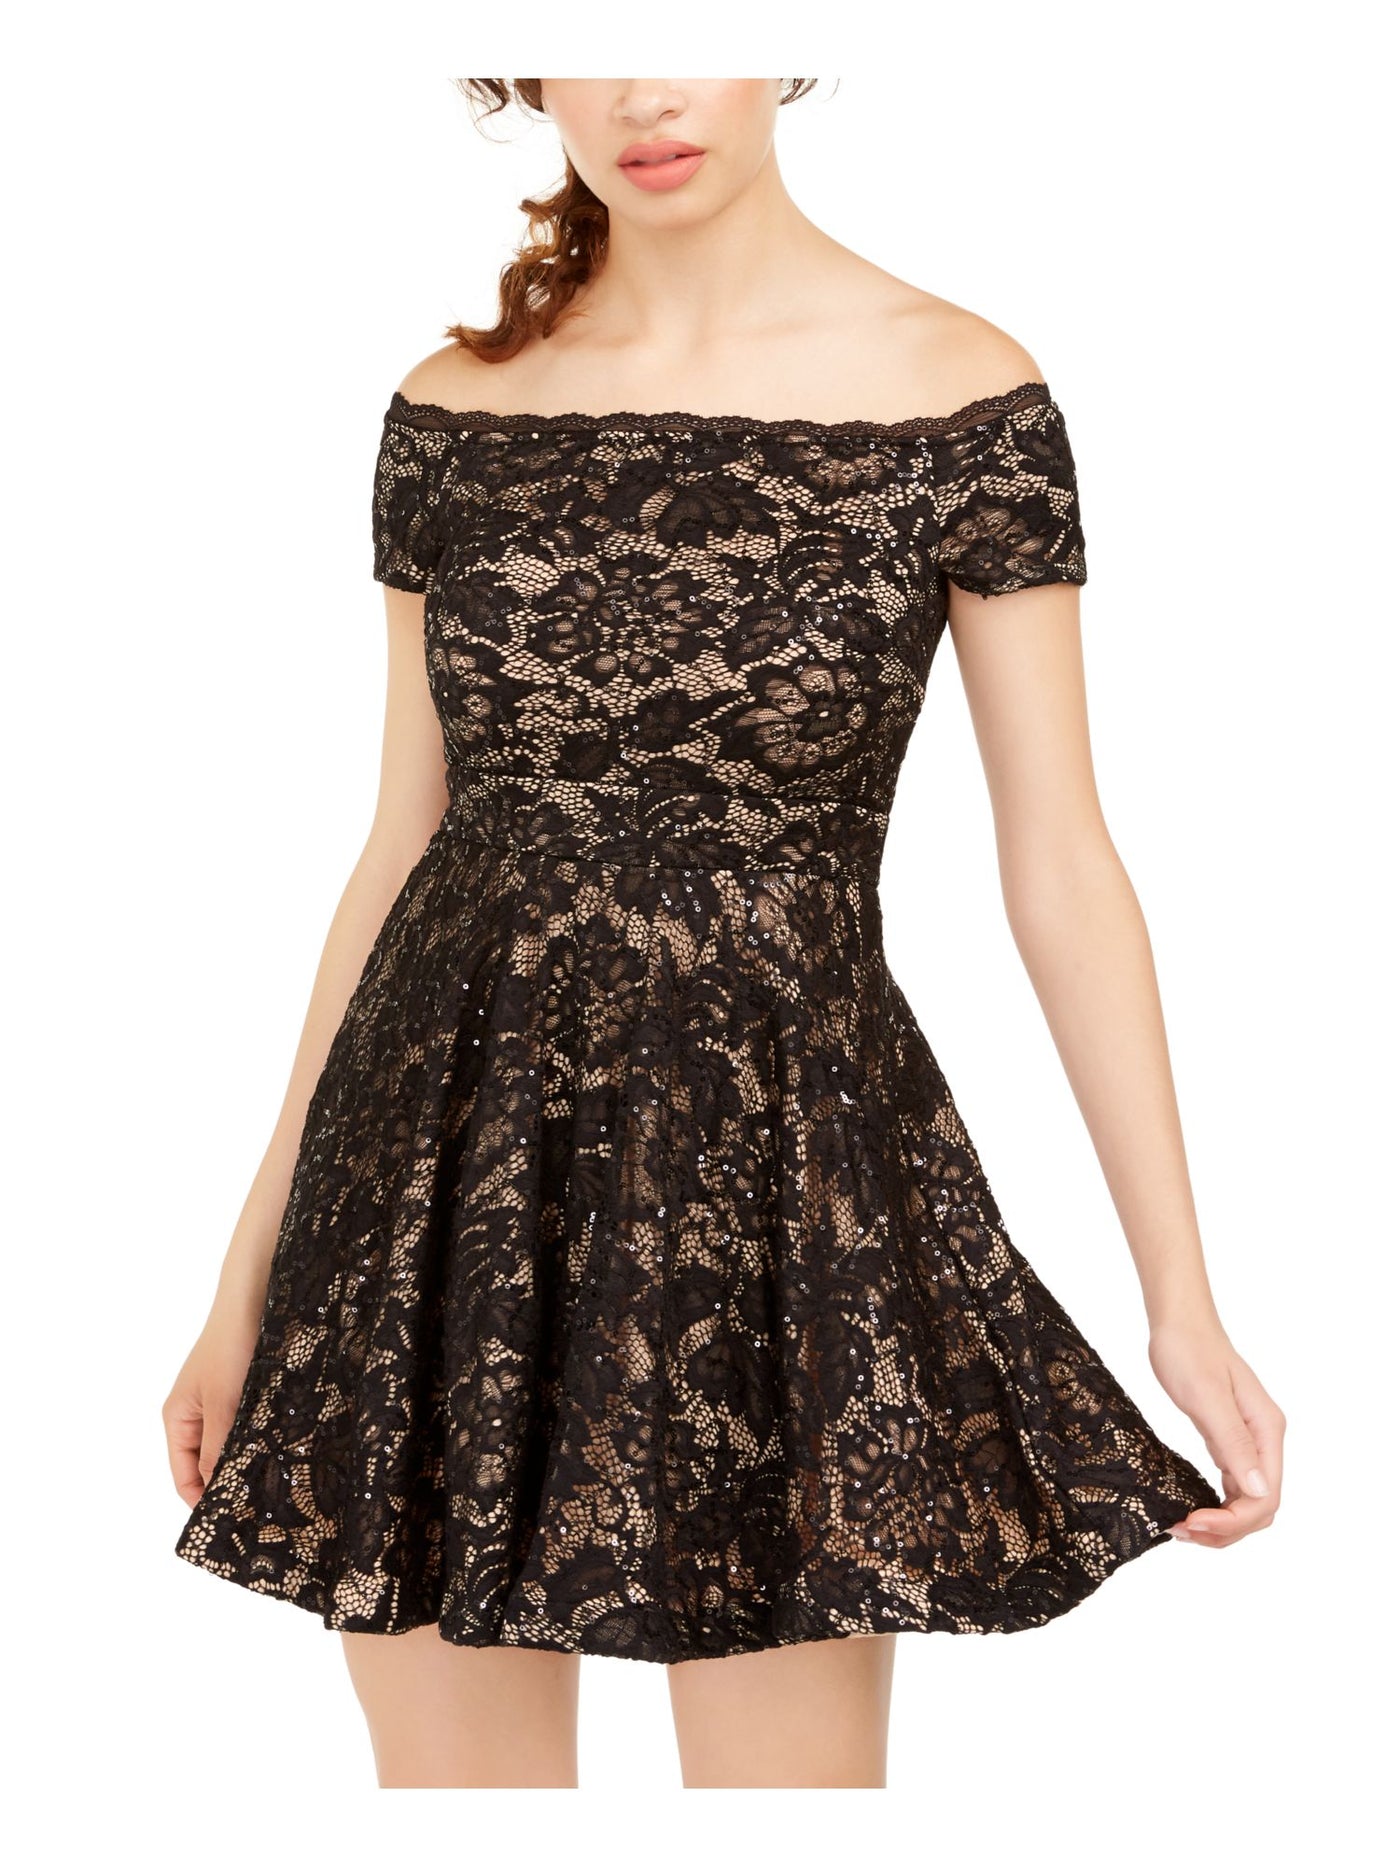 B DARLIN Womens Black Lace Sequined Off Shoulder Short Party Fit + Flare Dress Juniors 11\12